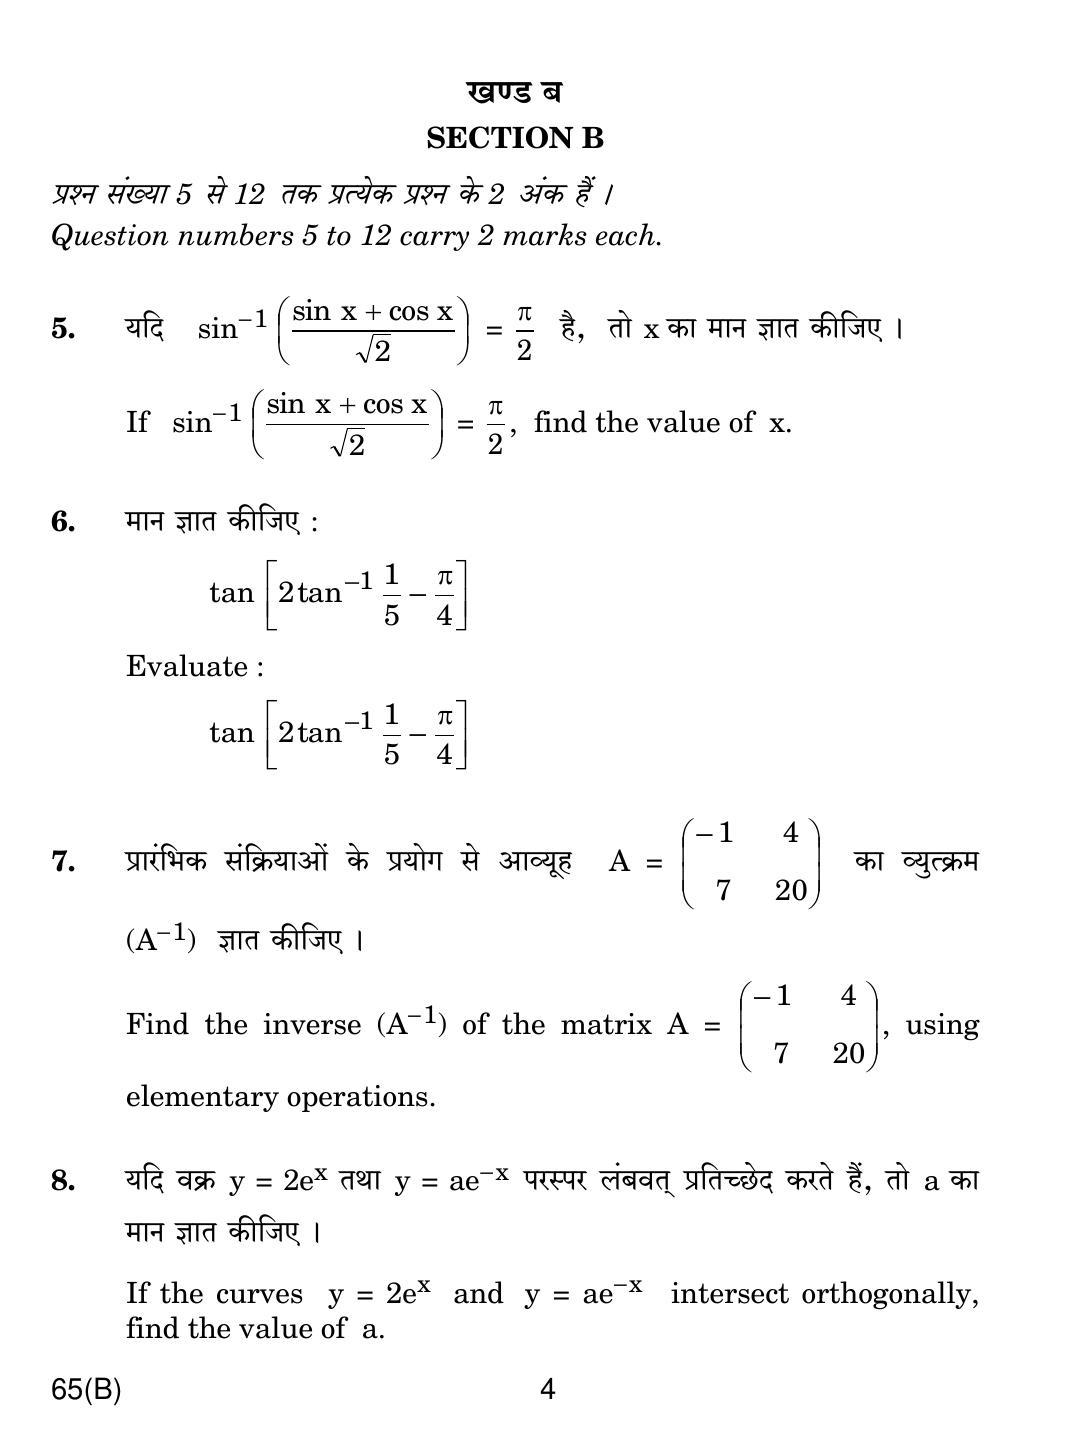 CBSE Class 12 65(B) MATHS FOR BLIND CANDIDATES 2018 Question Paper - Page 4